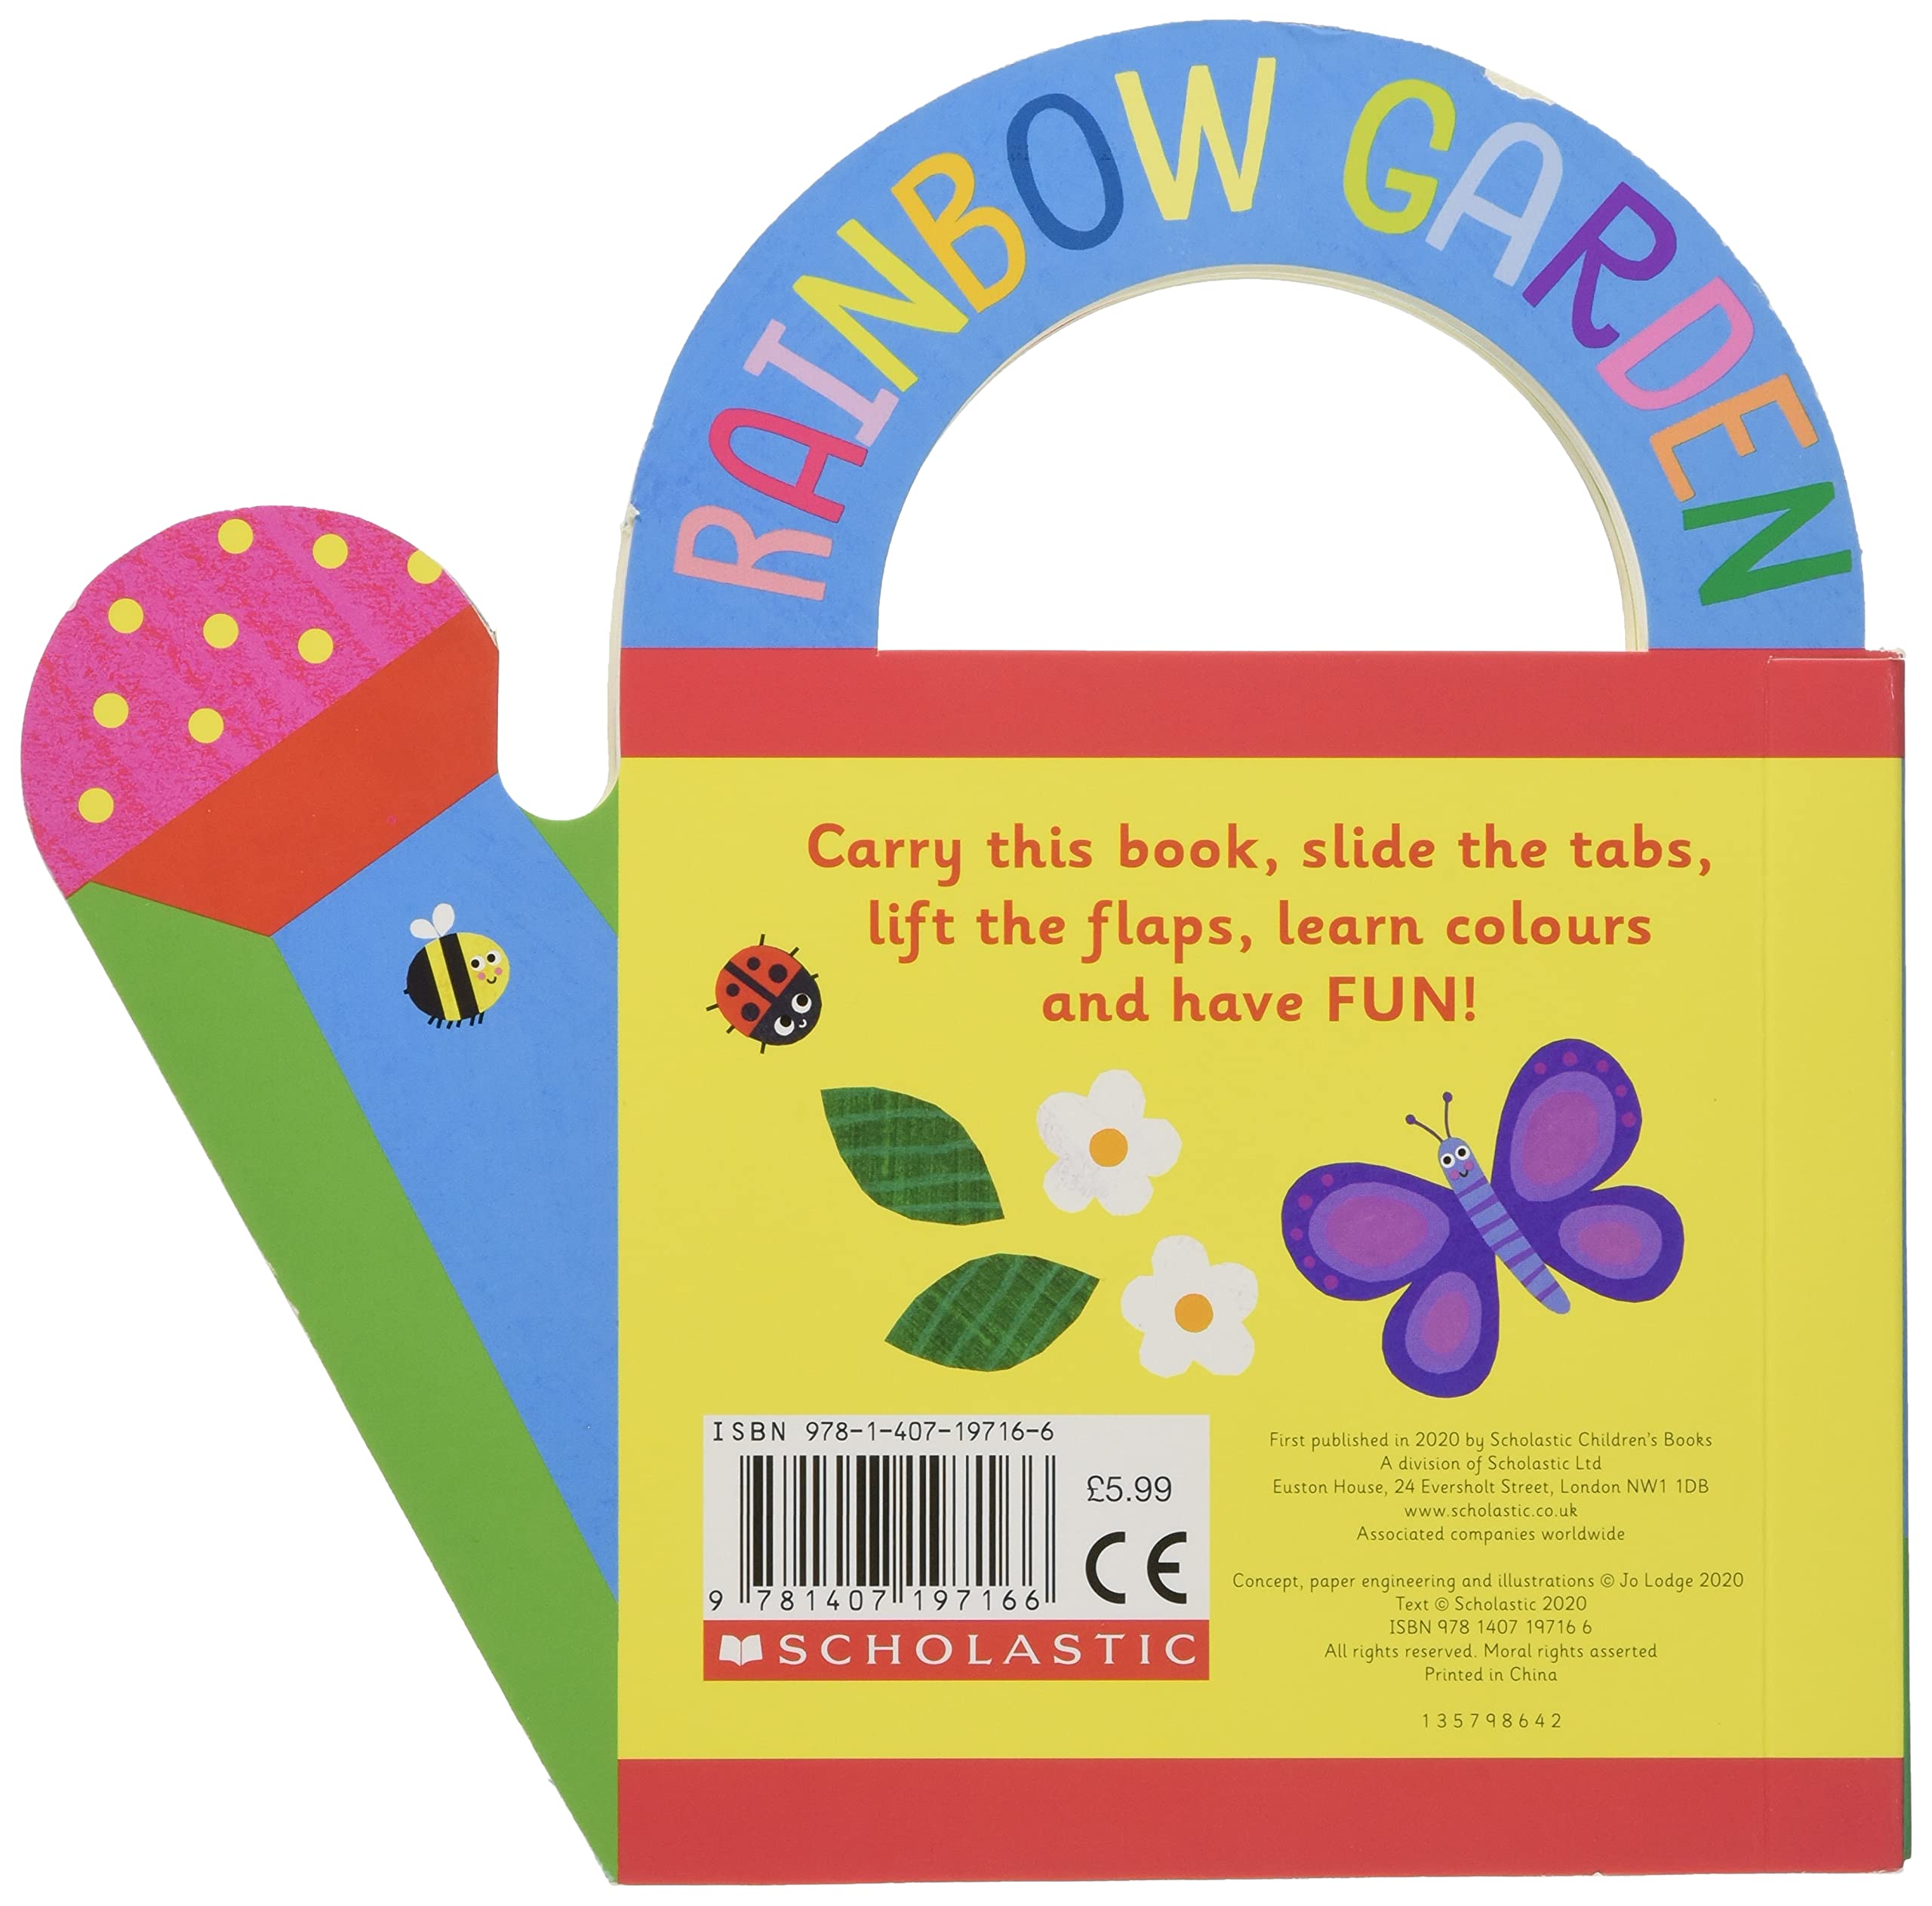 Rainbow Garden: A Slide-Lift-Learn Book (Concepts to Carry) Board book